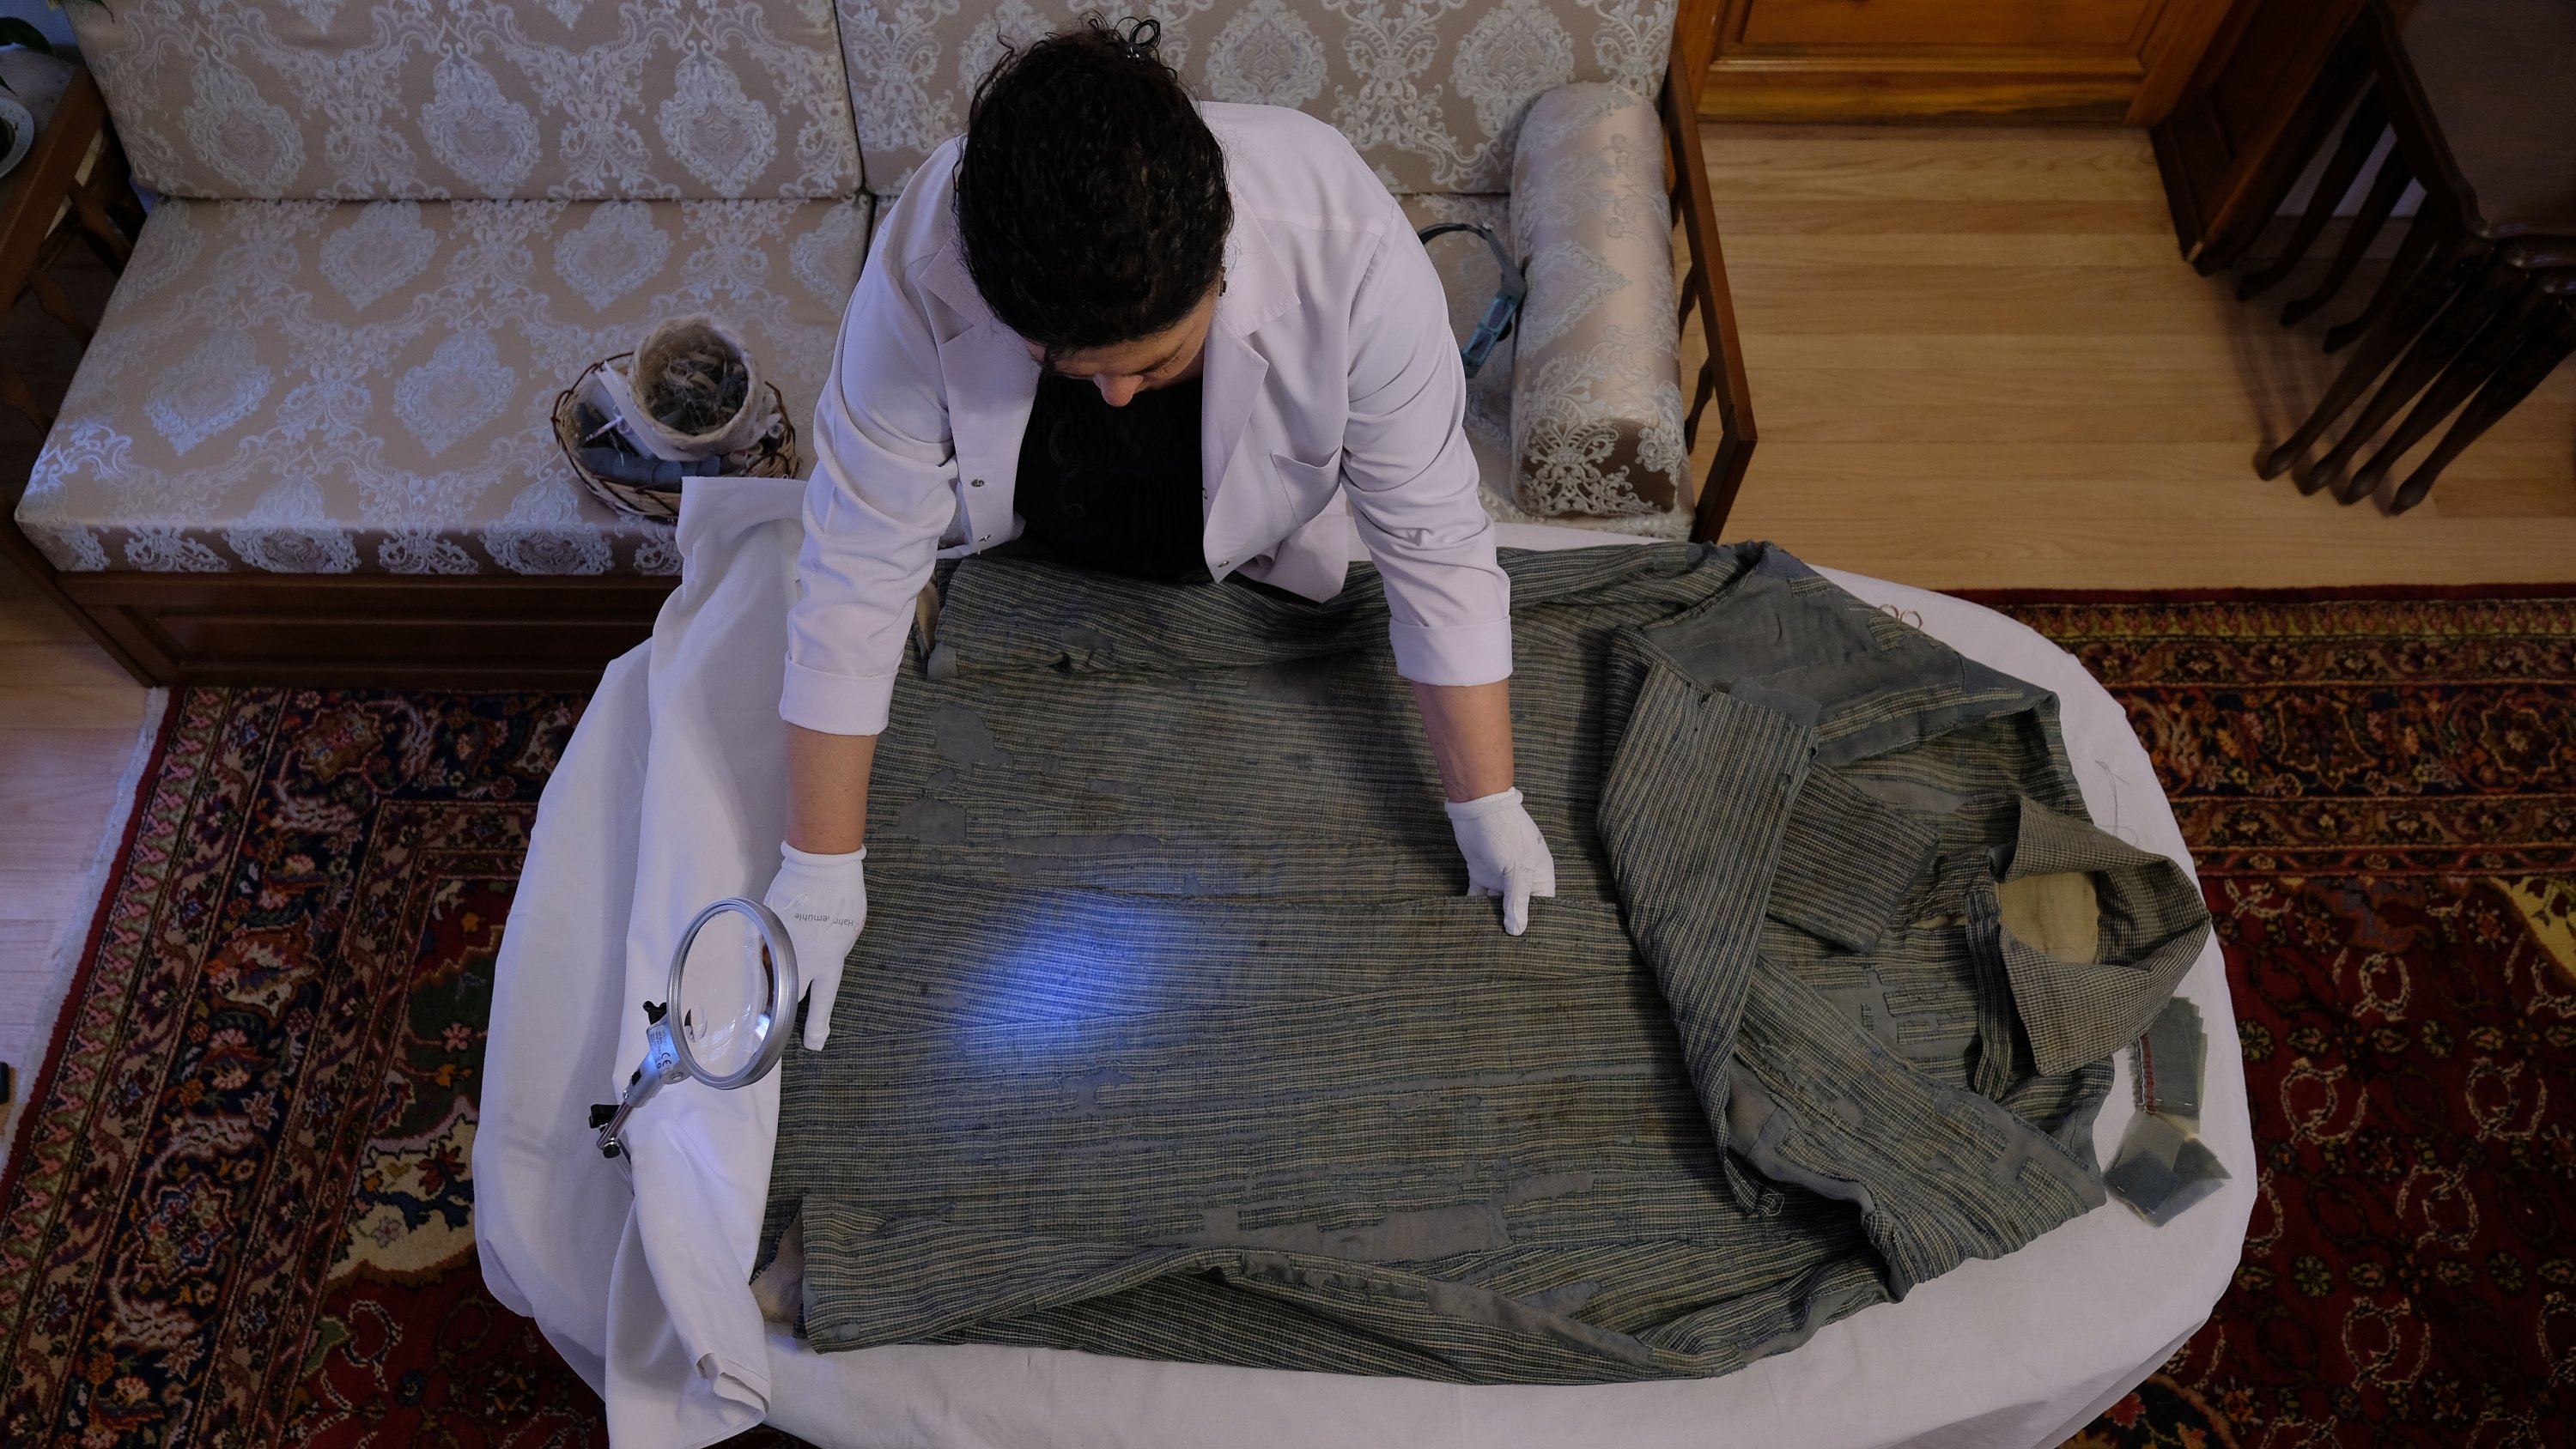 The clothes of Mevlana Jalaluddin Rumi kept in special boxes for years have come to light for restoration work, Konya, Turkey, June 18, 2022. (DHA Photo)